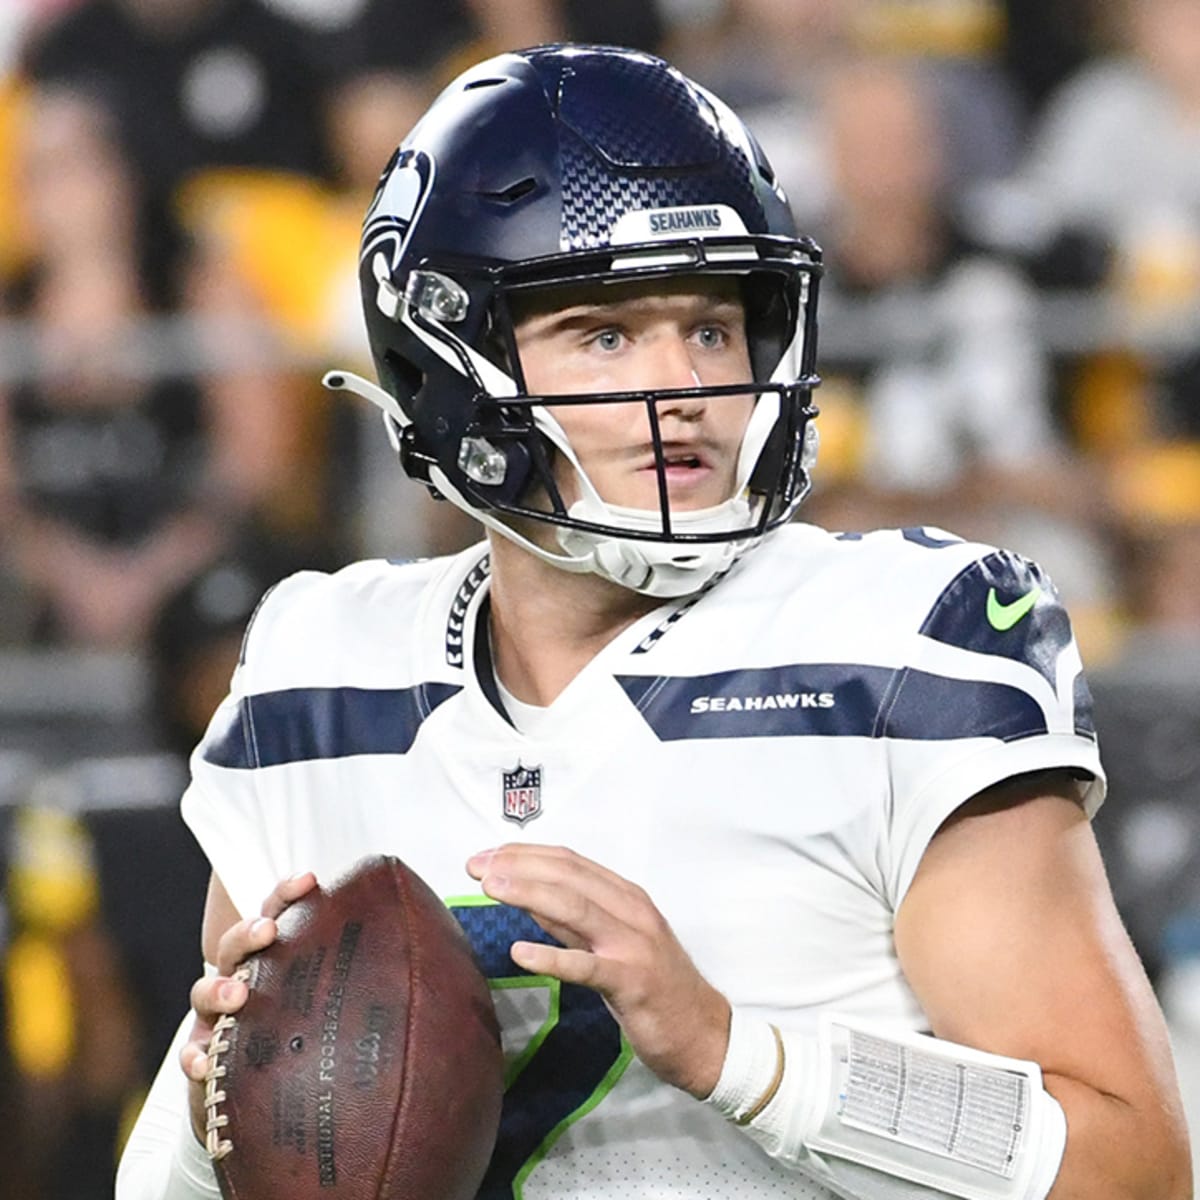 NFL News: What's next for Drew Lock in 2022? - Turf Show Times